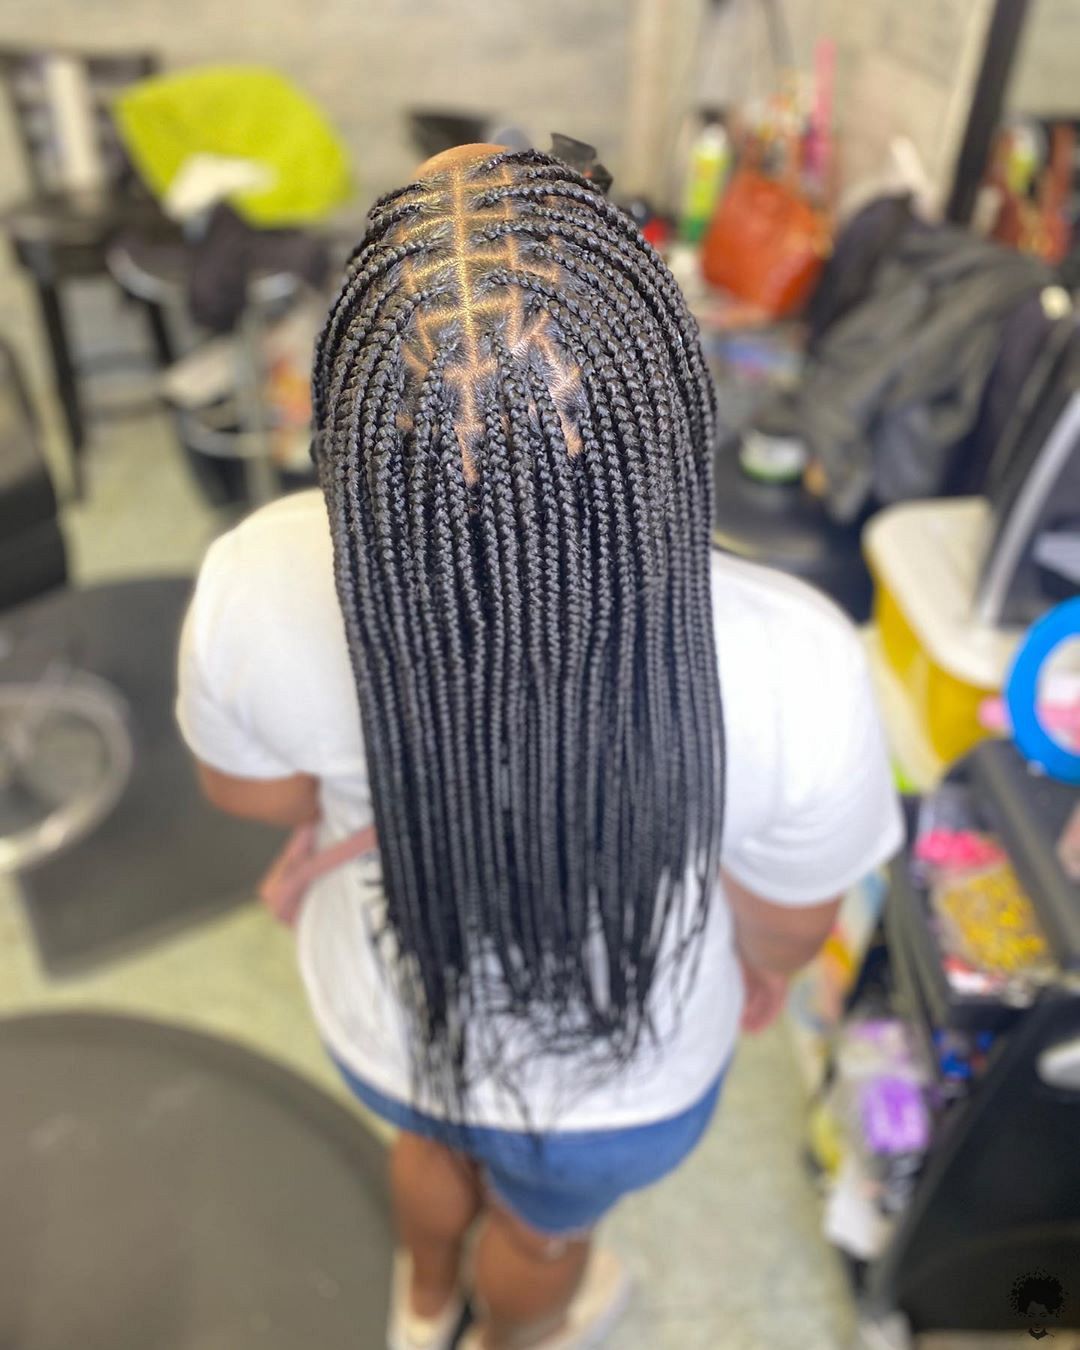 Best Ghana Braid Hairstyles For 2021 Amazing Ghana Braids To Try Out This Season 007